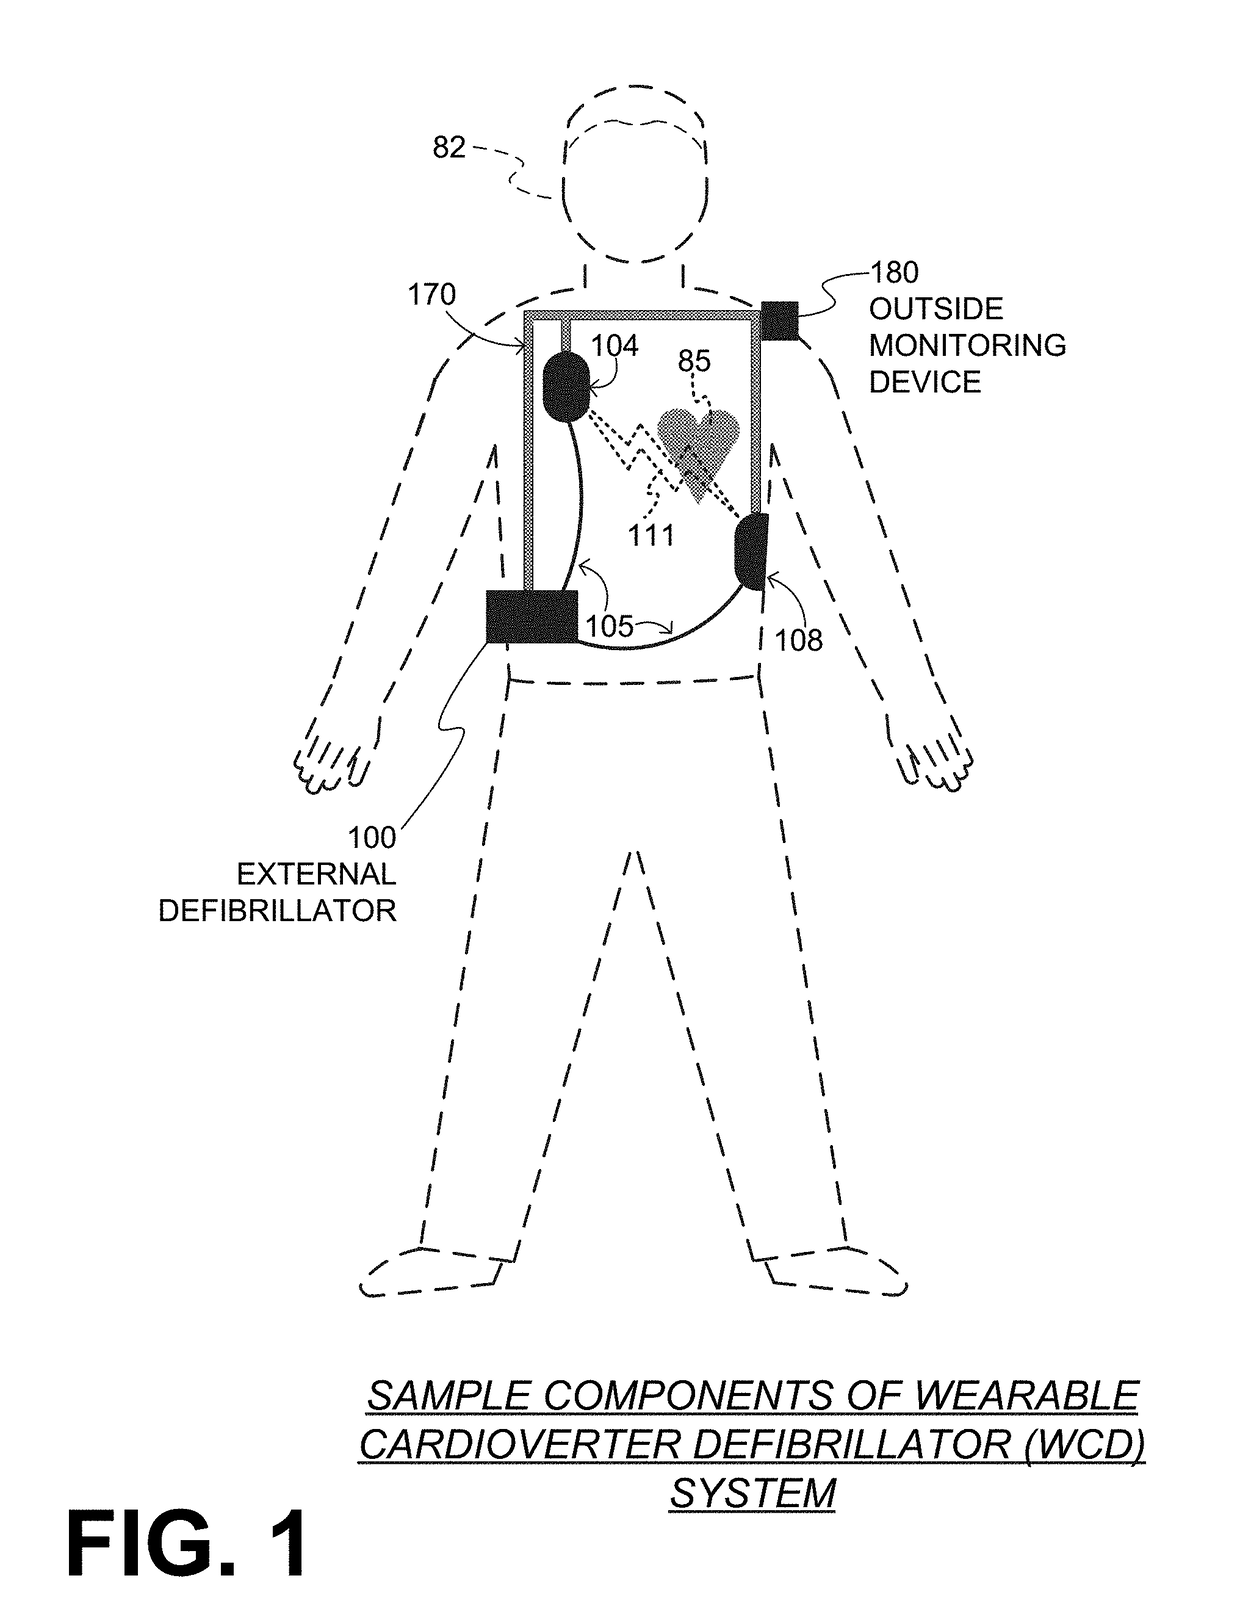 Wearable cardioverter defibrillator (WCD) system measuring patient's respiration